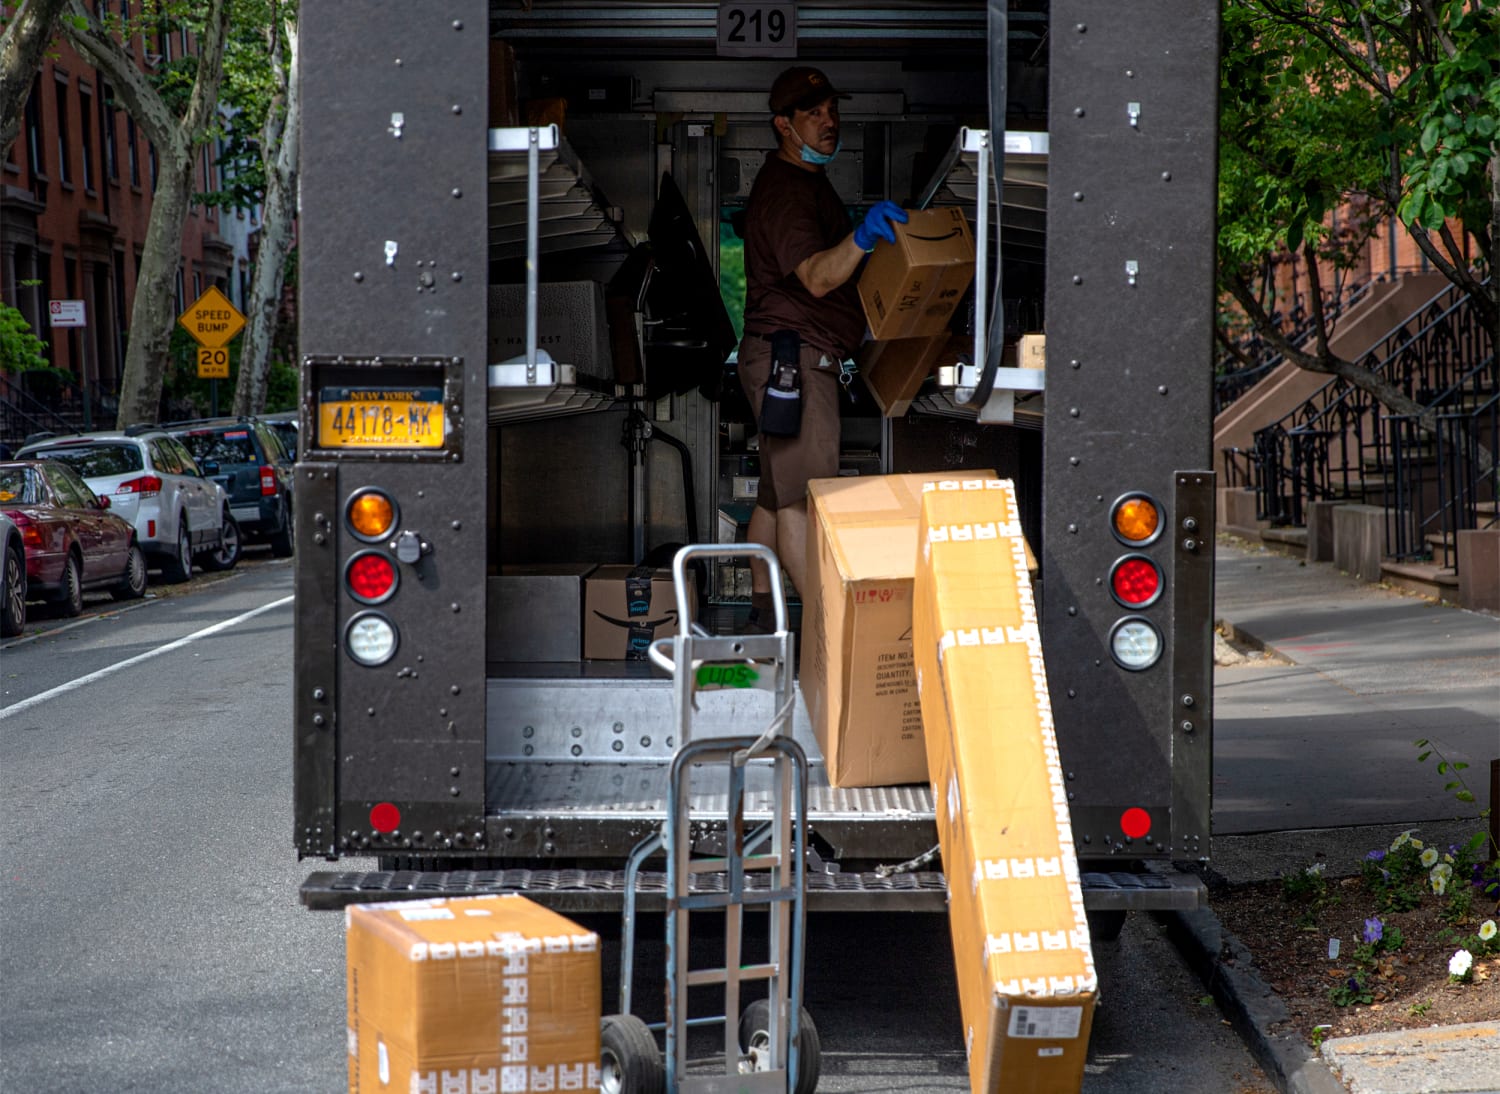 Summer was always a heat and health risk for UPS workers. Then